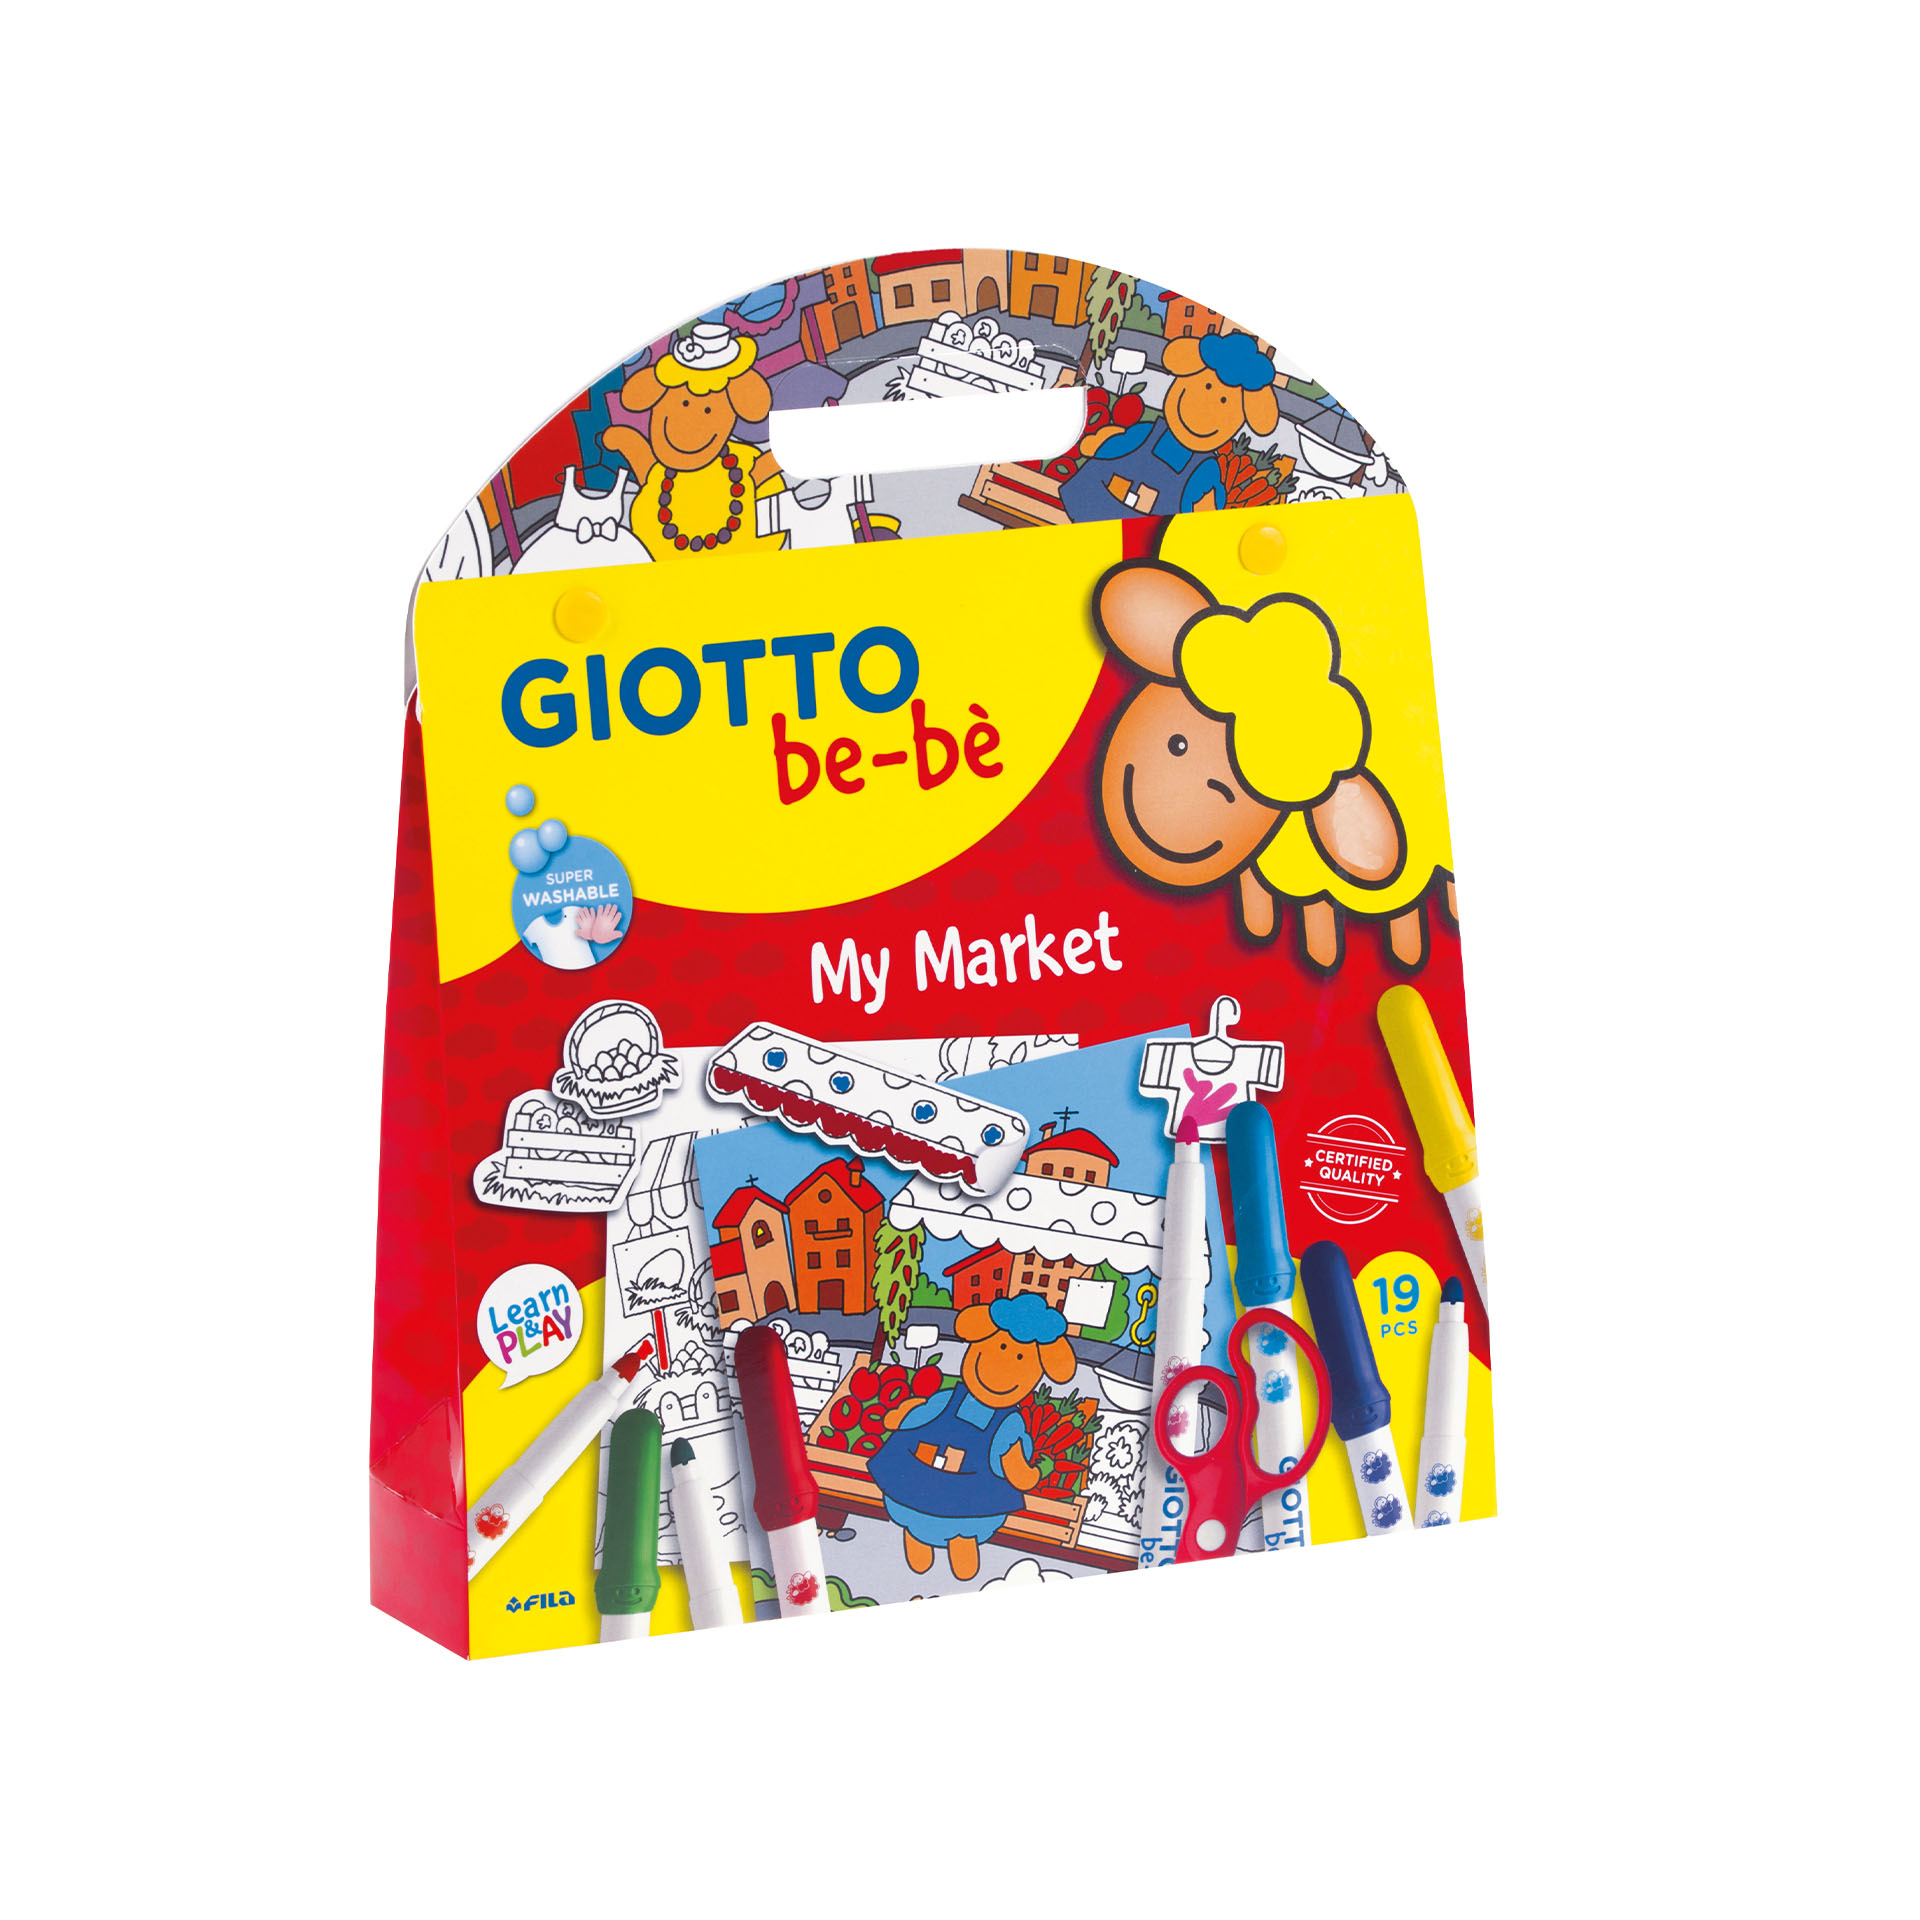 Giotto be-bè My Market, , large